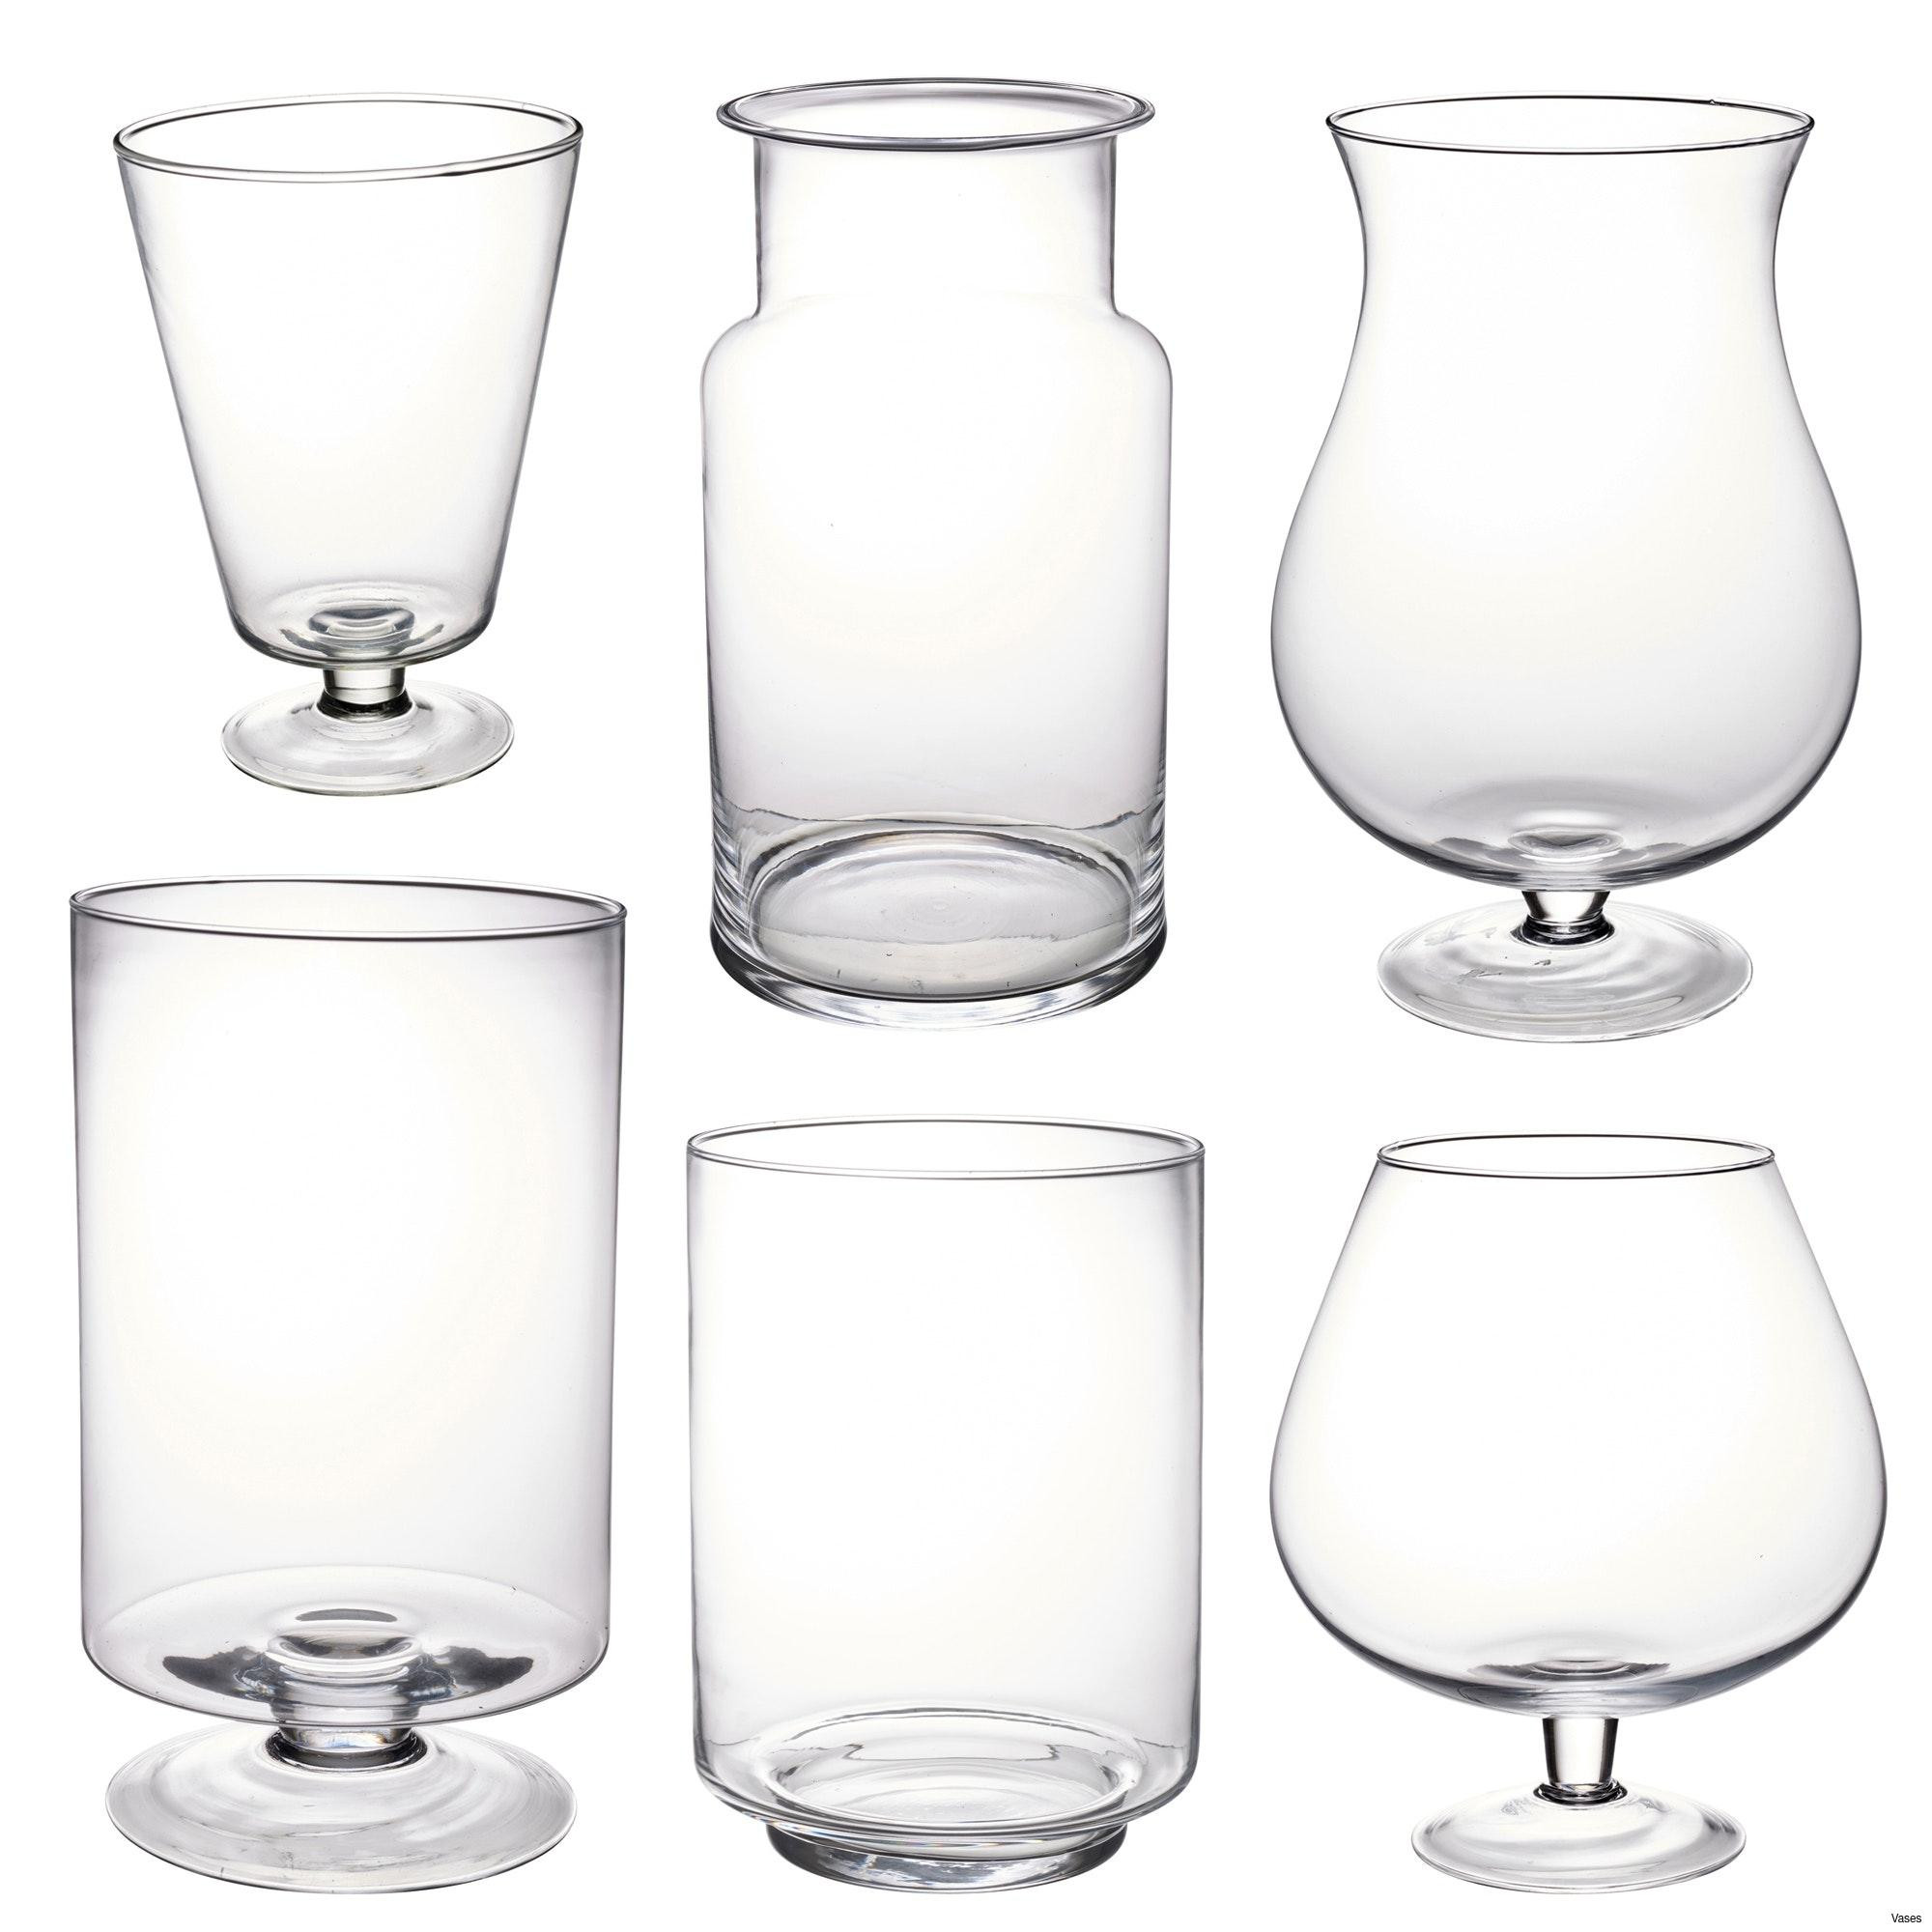 11 Unique Small Decorative Glass Vases 2024 free download small decorative glass vases of unique dining room accent with reference to living room small vases with regard to unique dining room accent with reference to living room small vases beautif